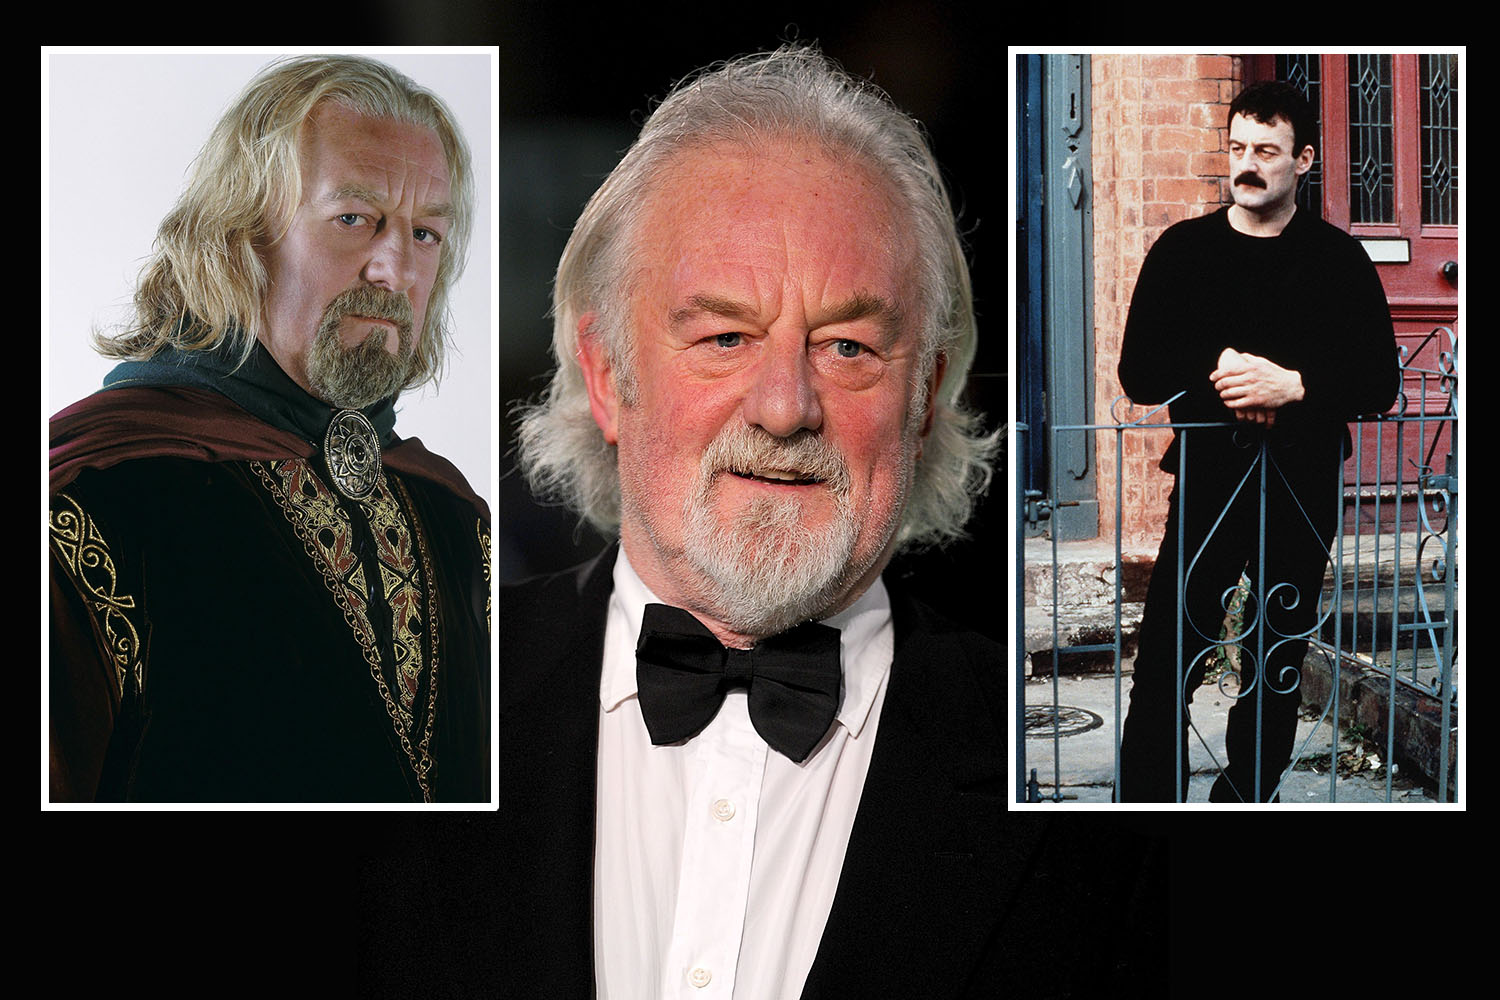 Titanic and Lord of the Rings actor dies aged 79 as tributes pour in